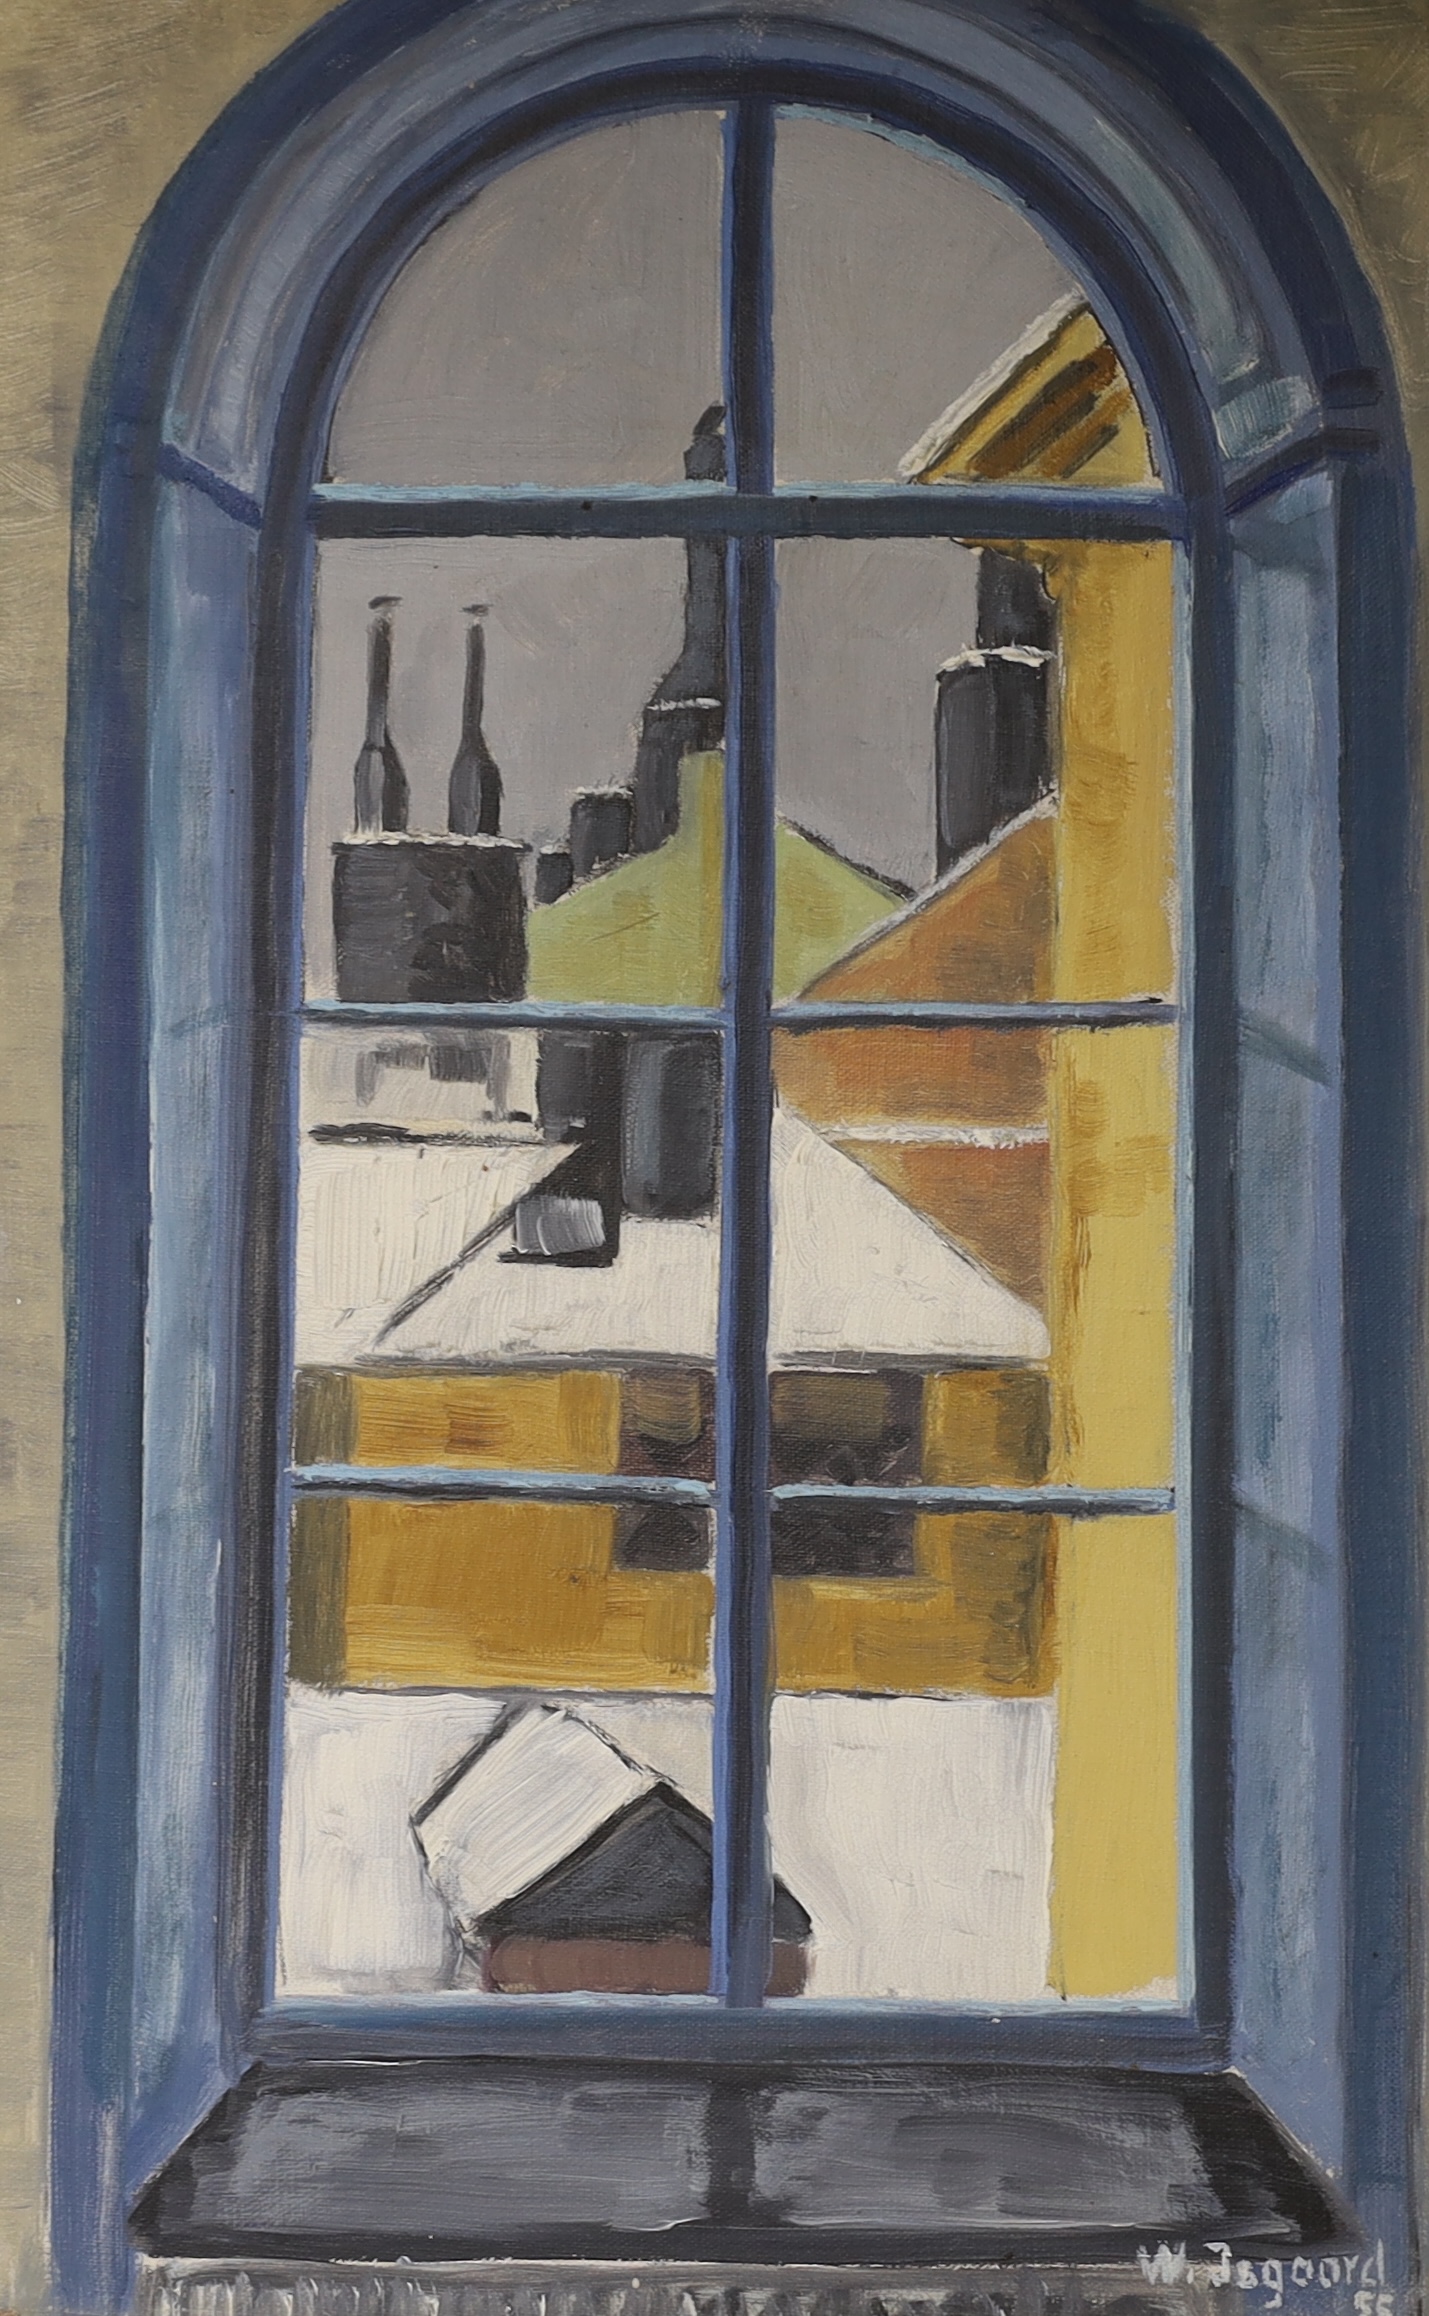 Wadsgoord, oil on board, Winter roof tops view from a window, signed and dated ‘55, 51 x 32cm